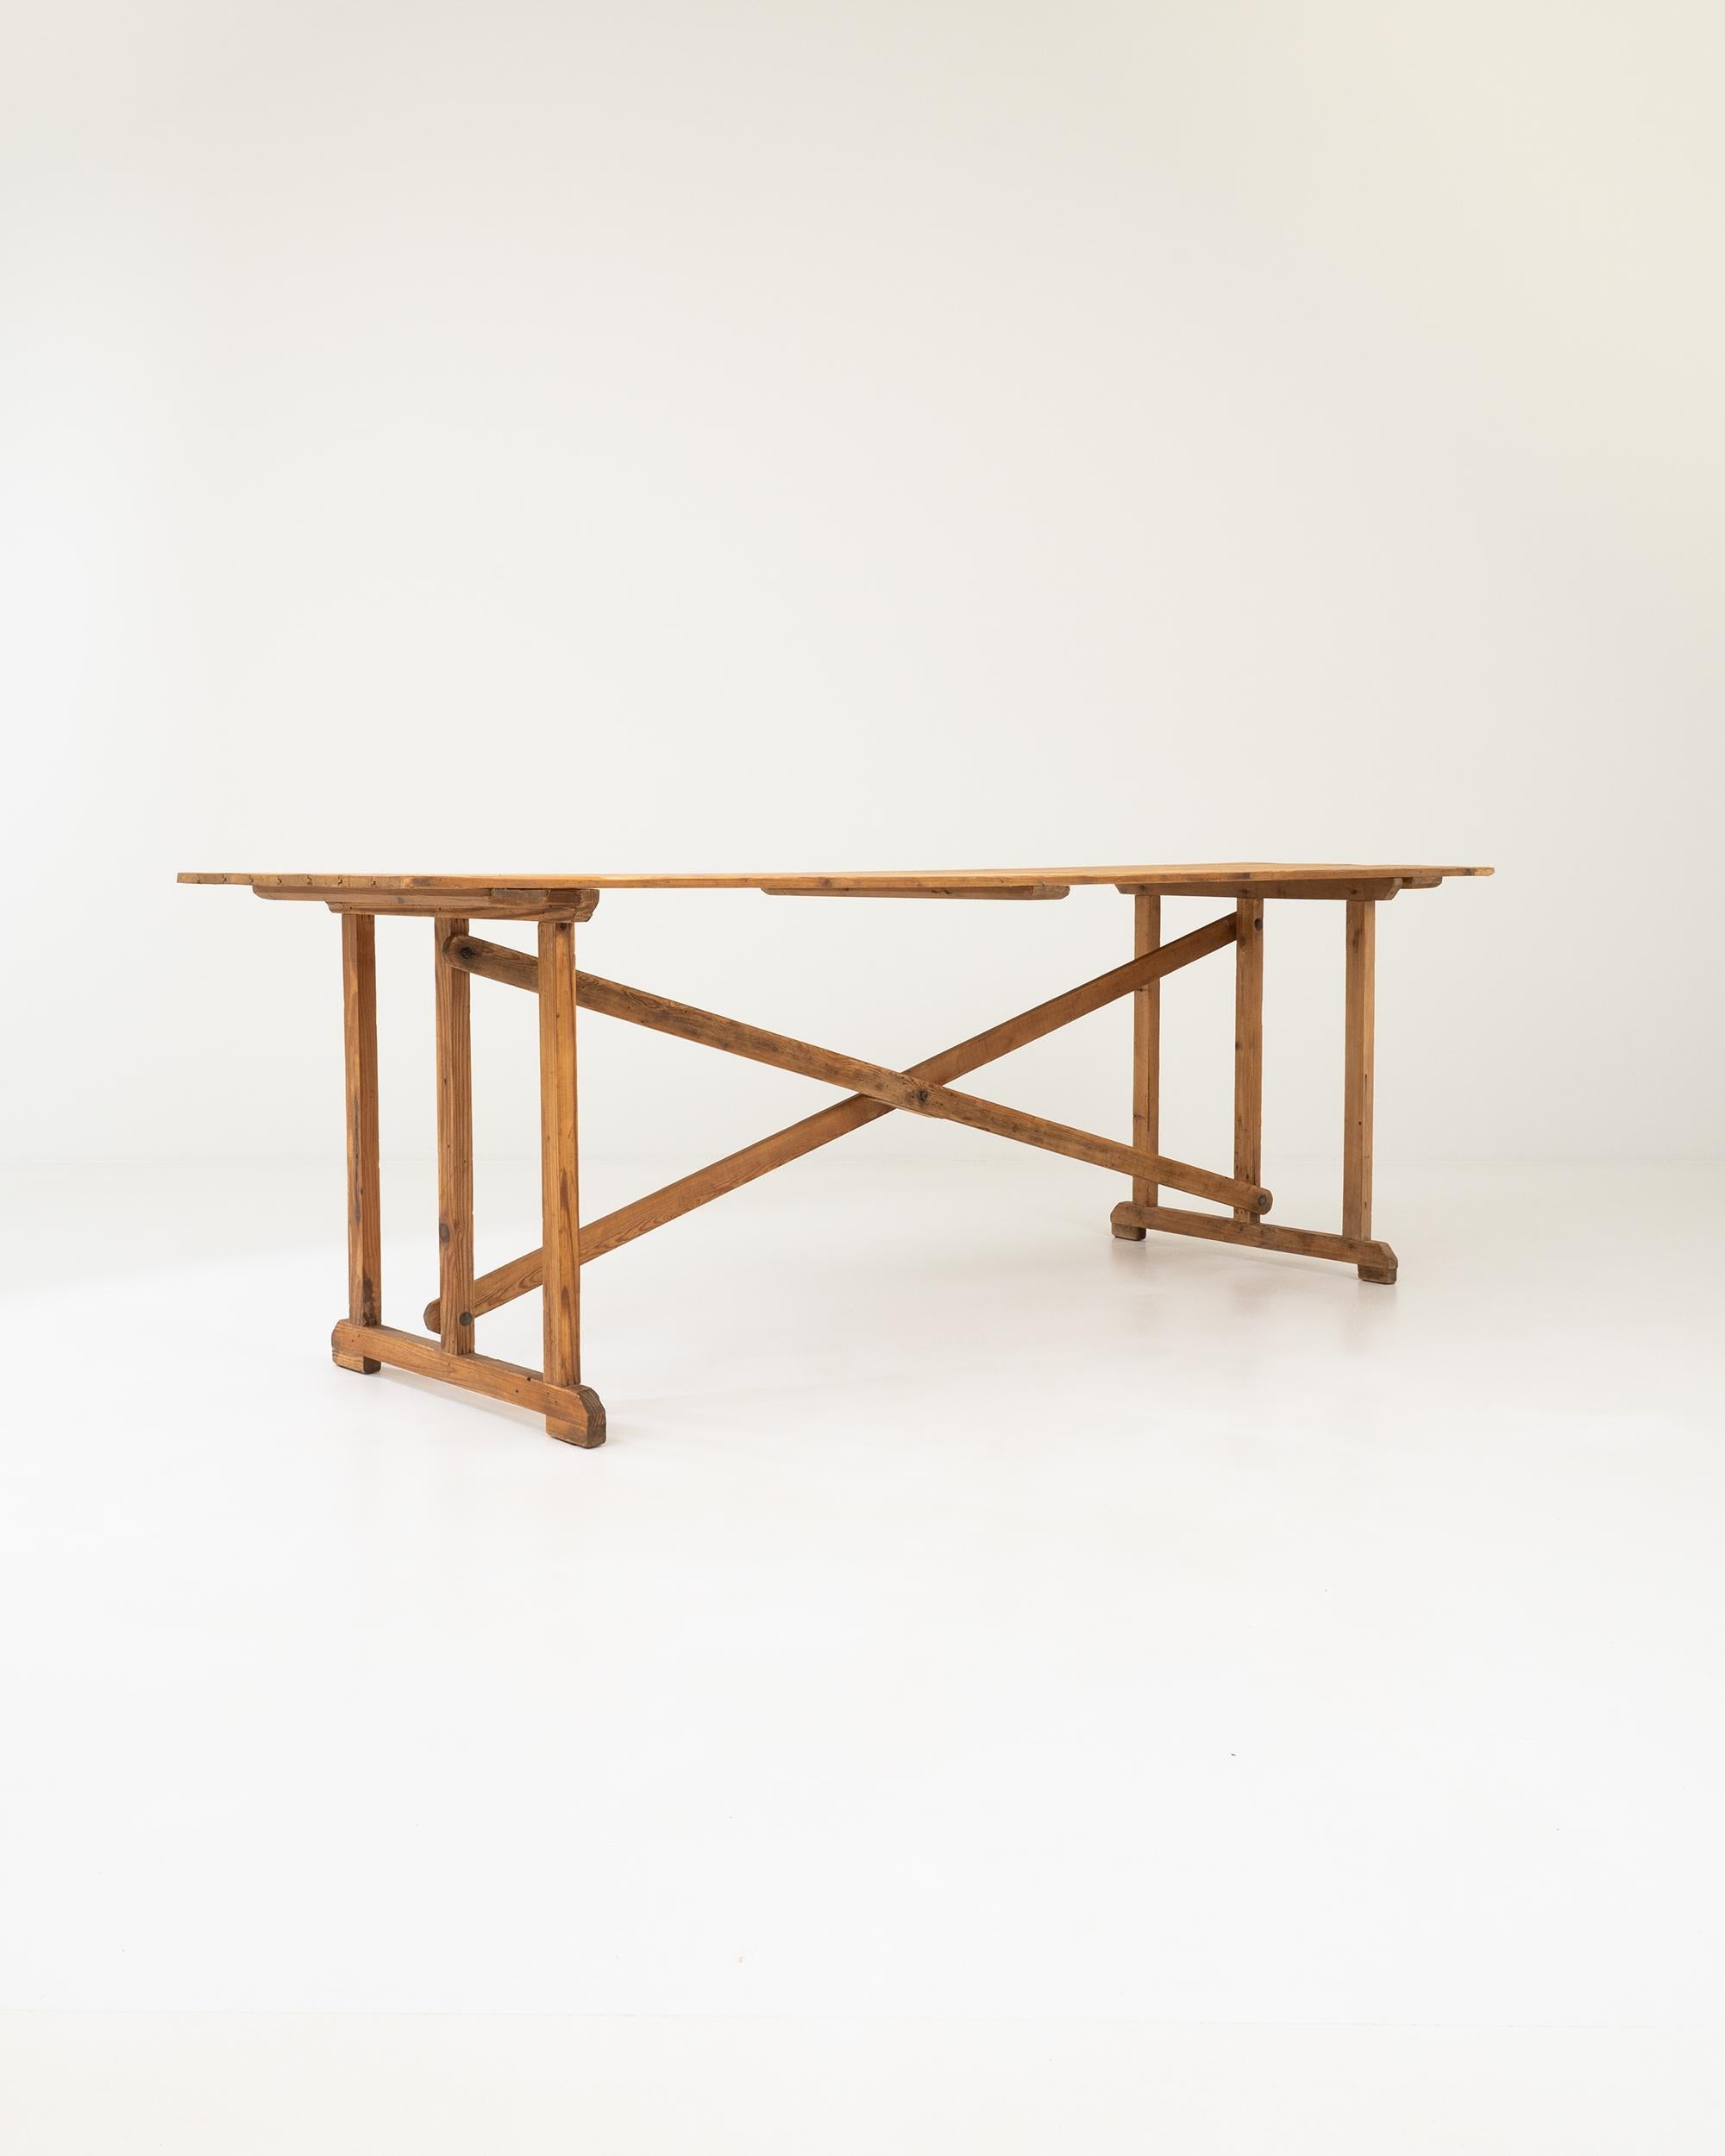 Made in Belgium in the mid-20th century, this utilitarian console wears a vintage charm, acquired through its years of service. The prominent framework of this humble wooden stand creates an impact through its authentic materiality, and geometric